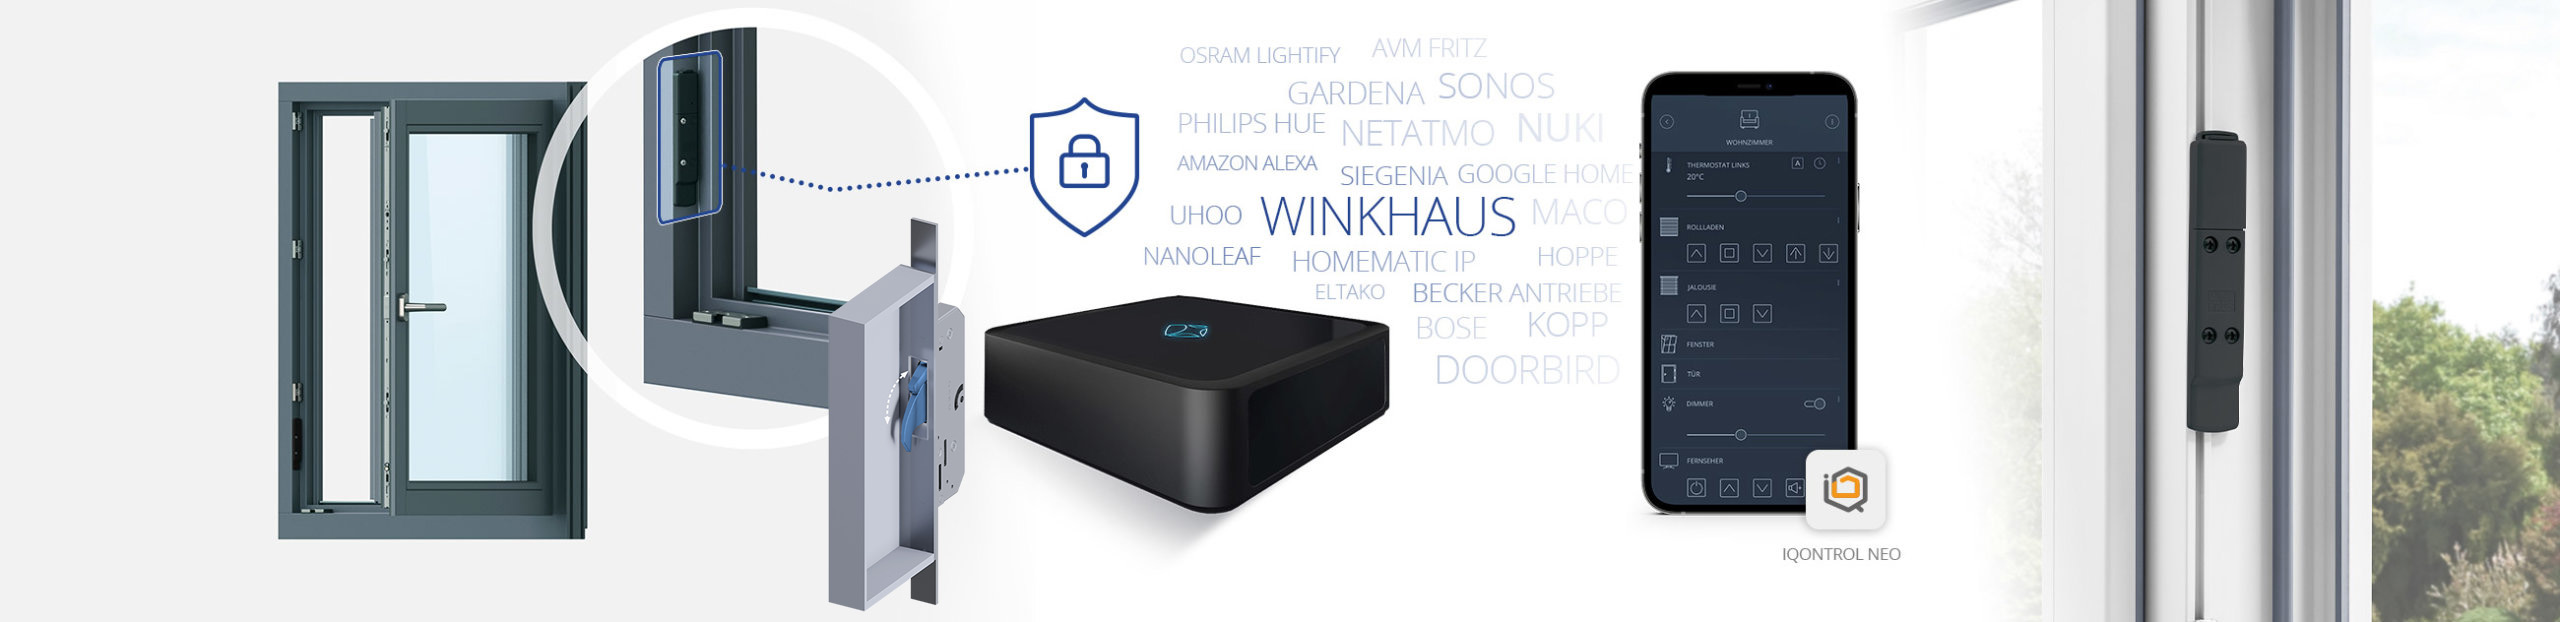 Winkhaus Works With Mediola - mediola connected living AG - Smart Home Solution